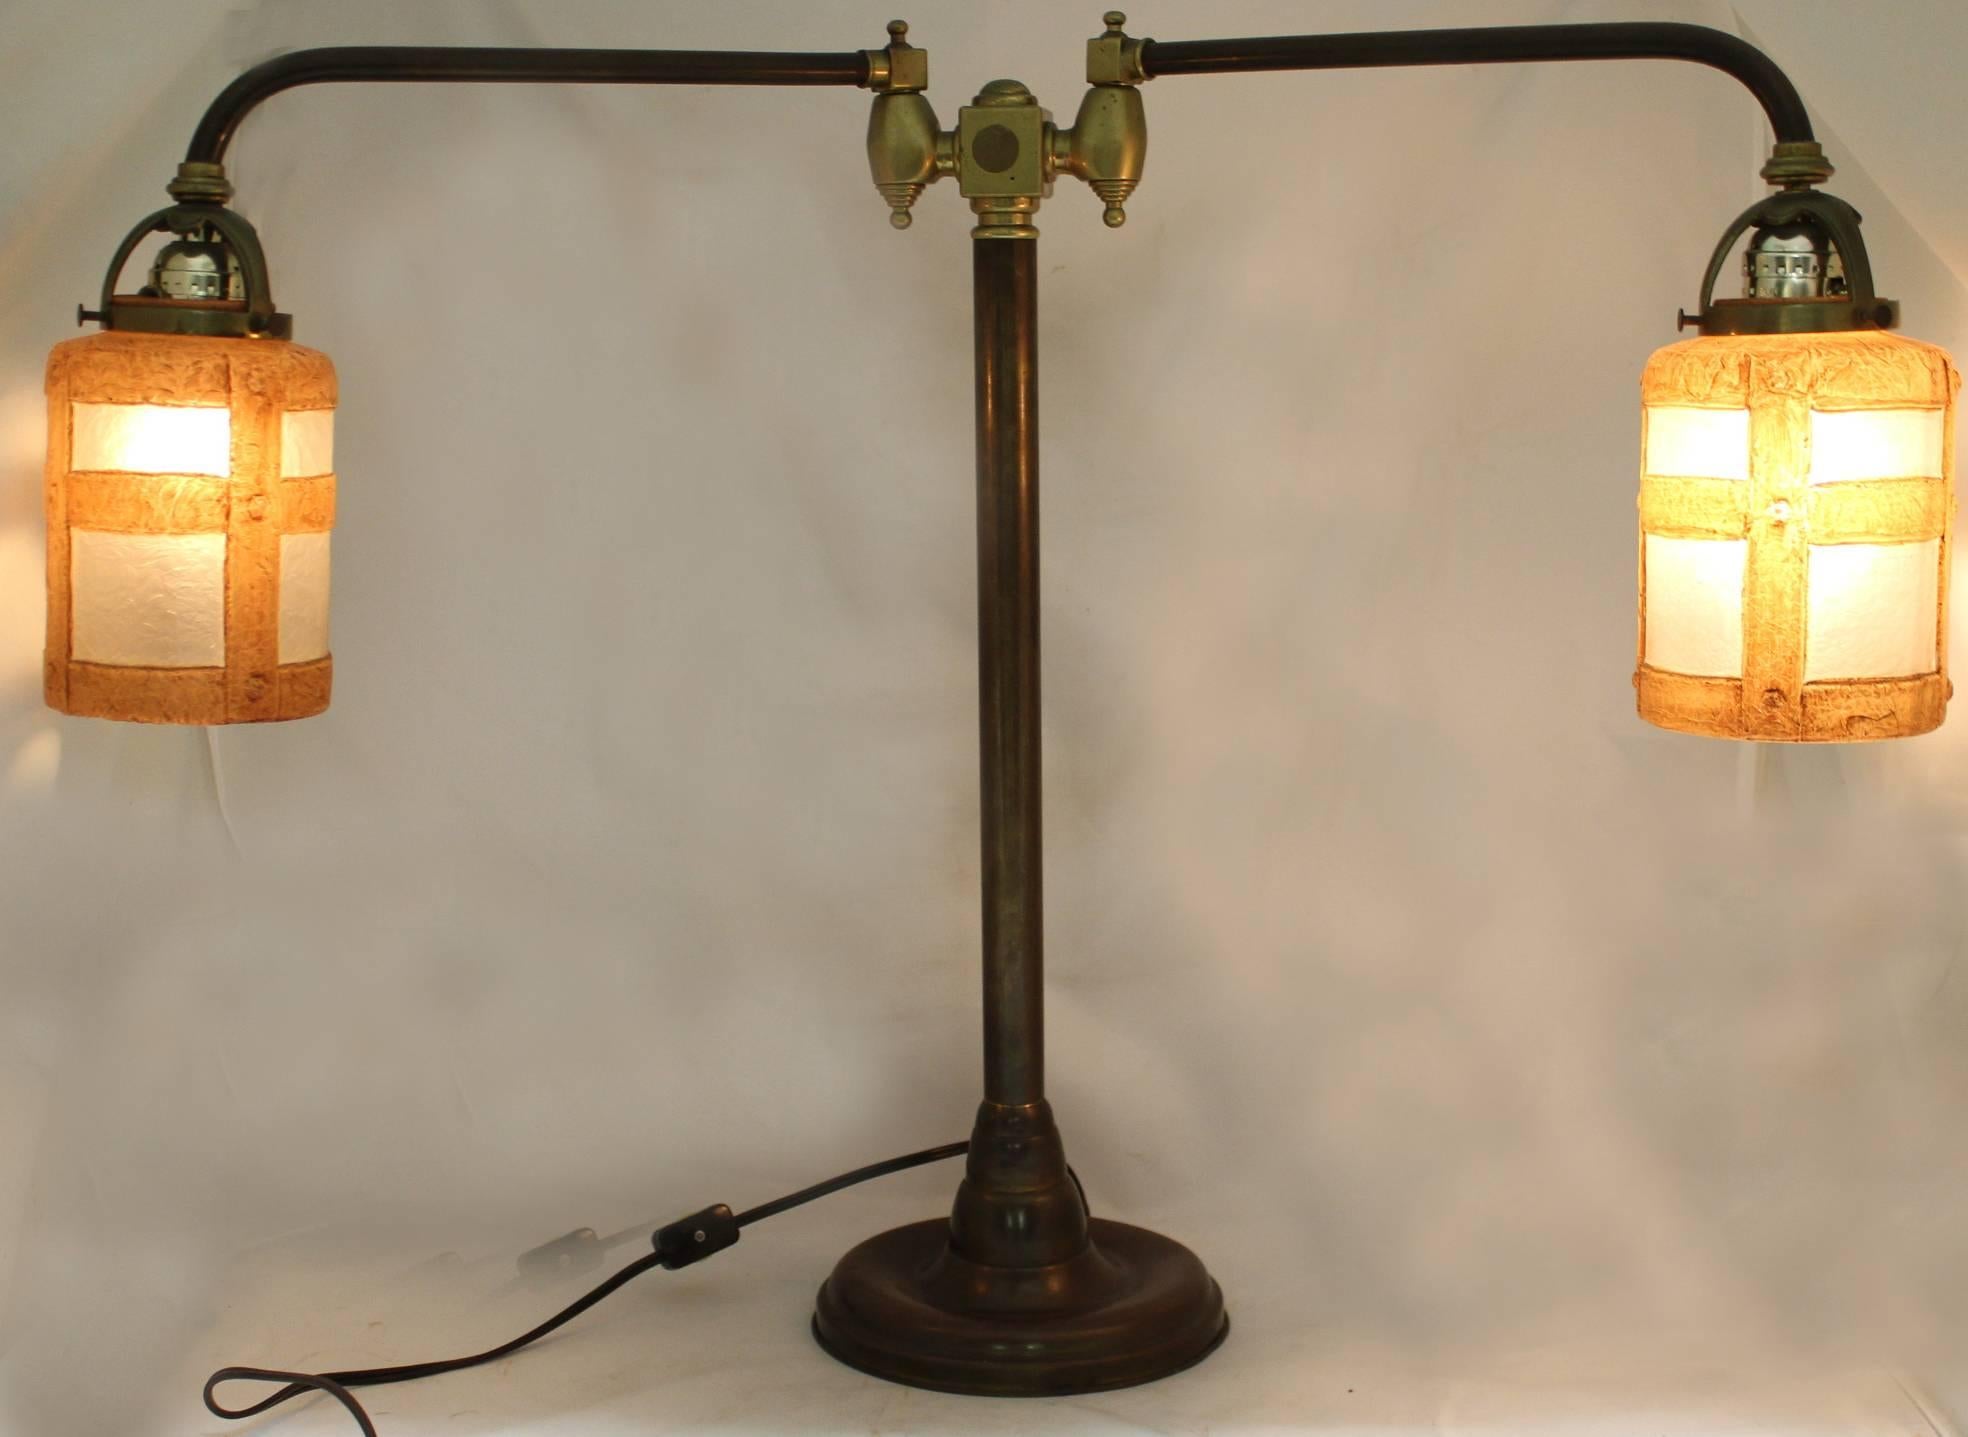 A splendid Arts and Crafts double student lamp, with two adjustable arms and chipped ice glass shades, each embossed Handel near the top rim, the base signed Handel at the top brass fixture. The lamp sockets have been replaced, and the lamp is in